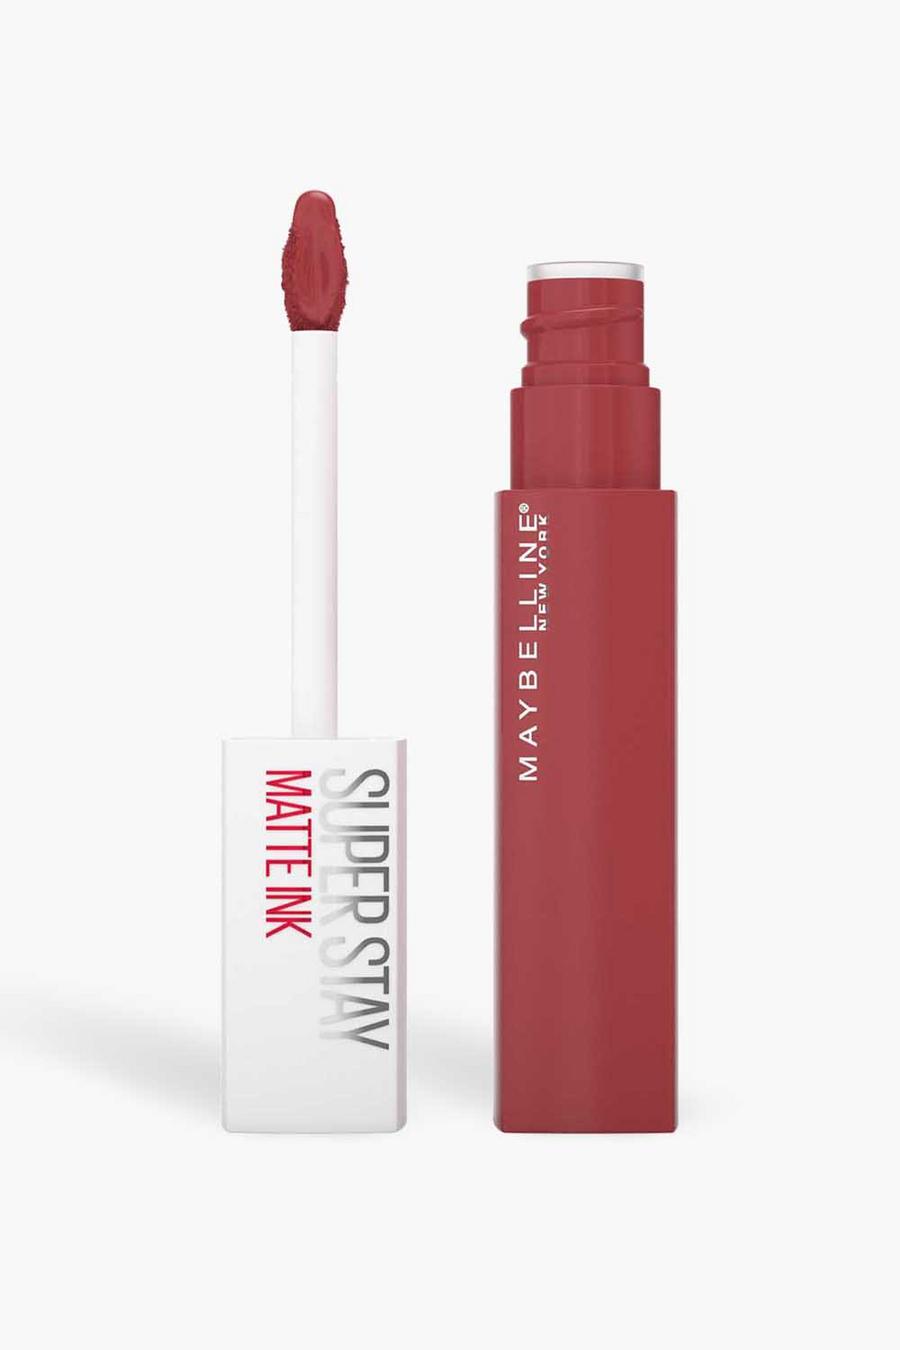 Maybelline - Rouge à lèvres liquide Superstay, 170 initiator